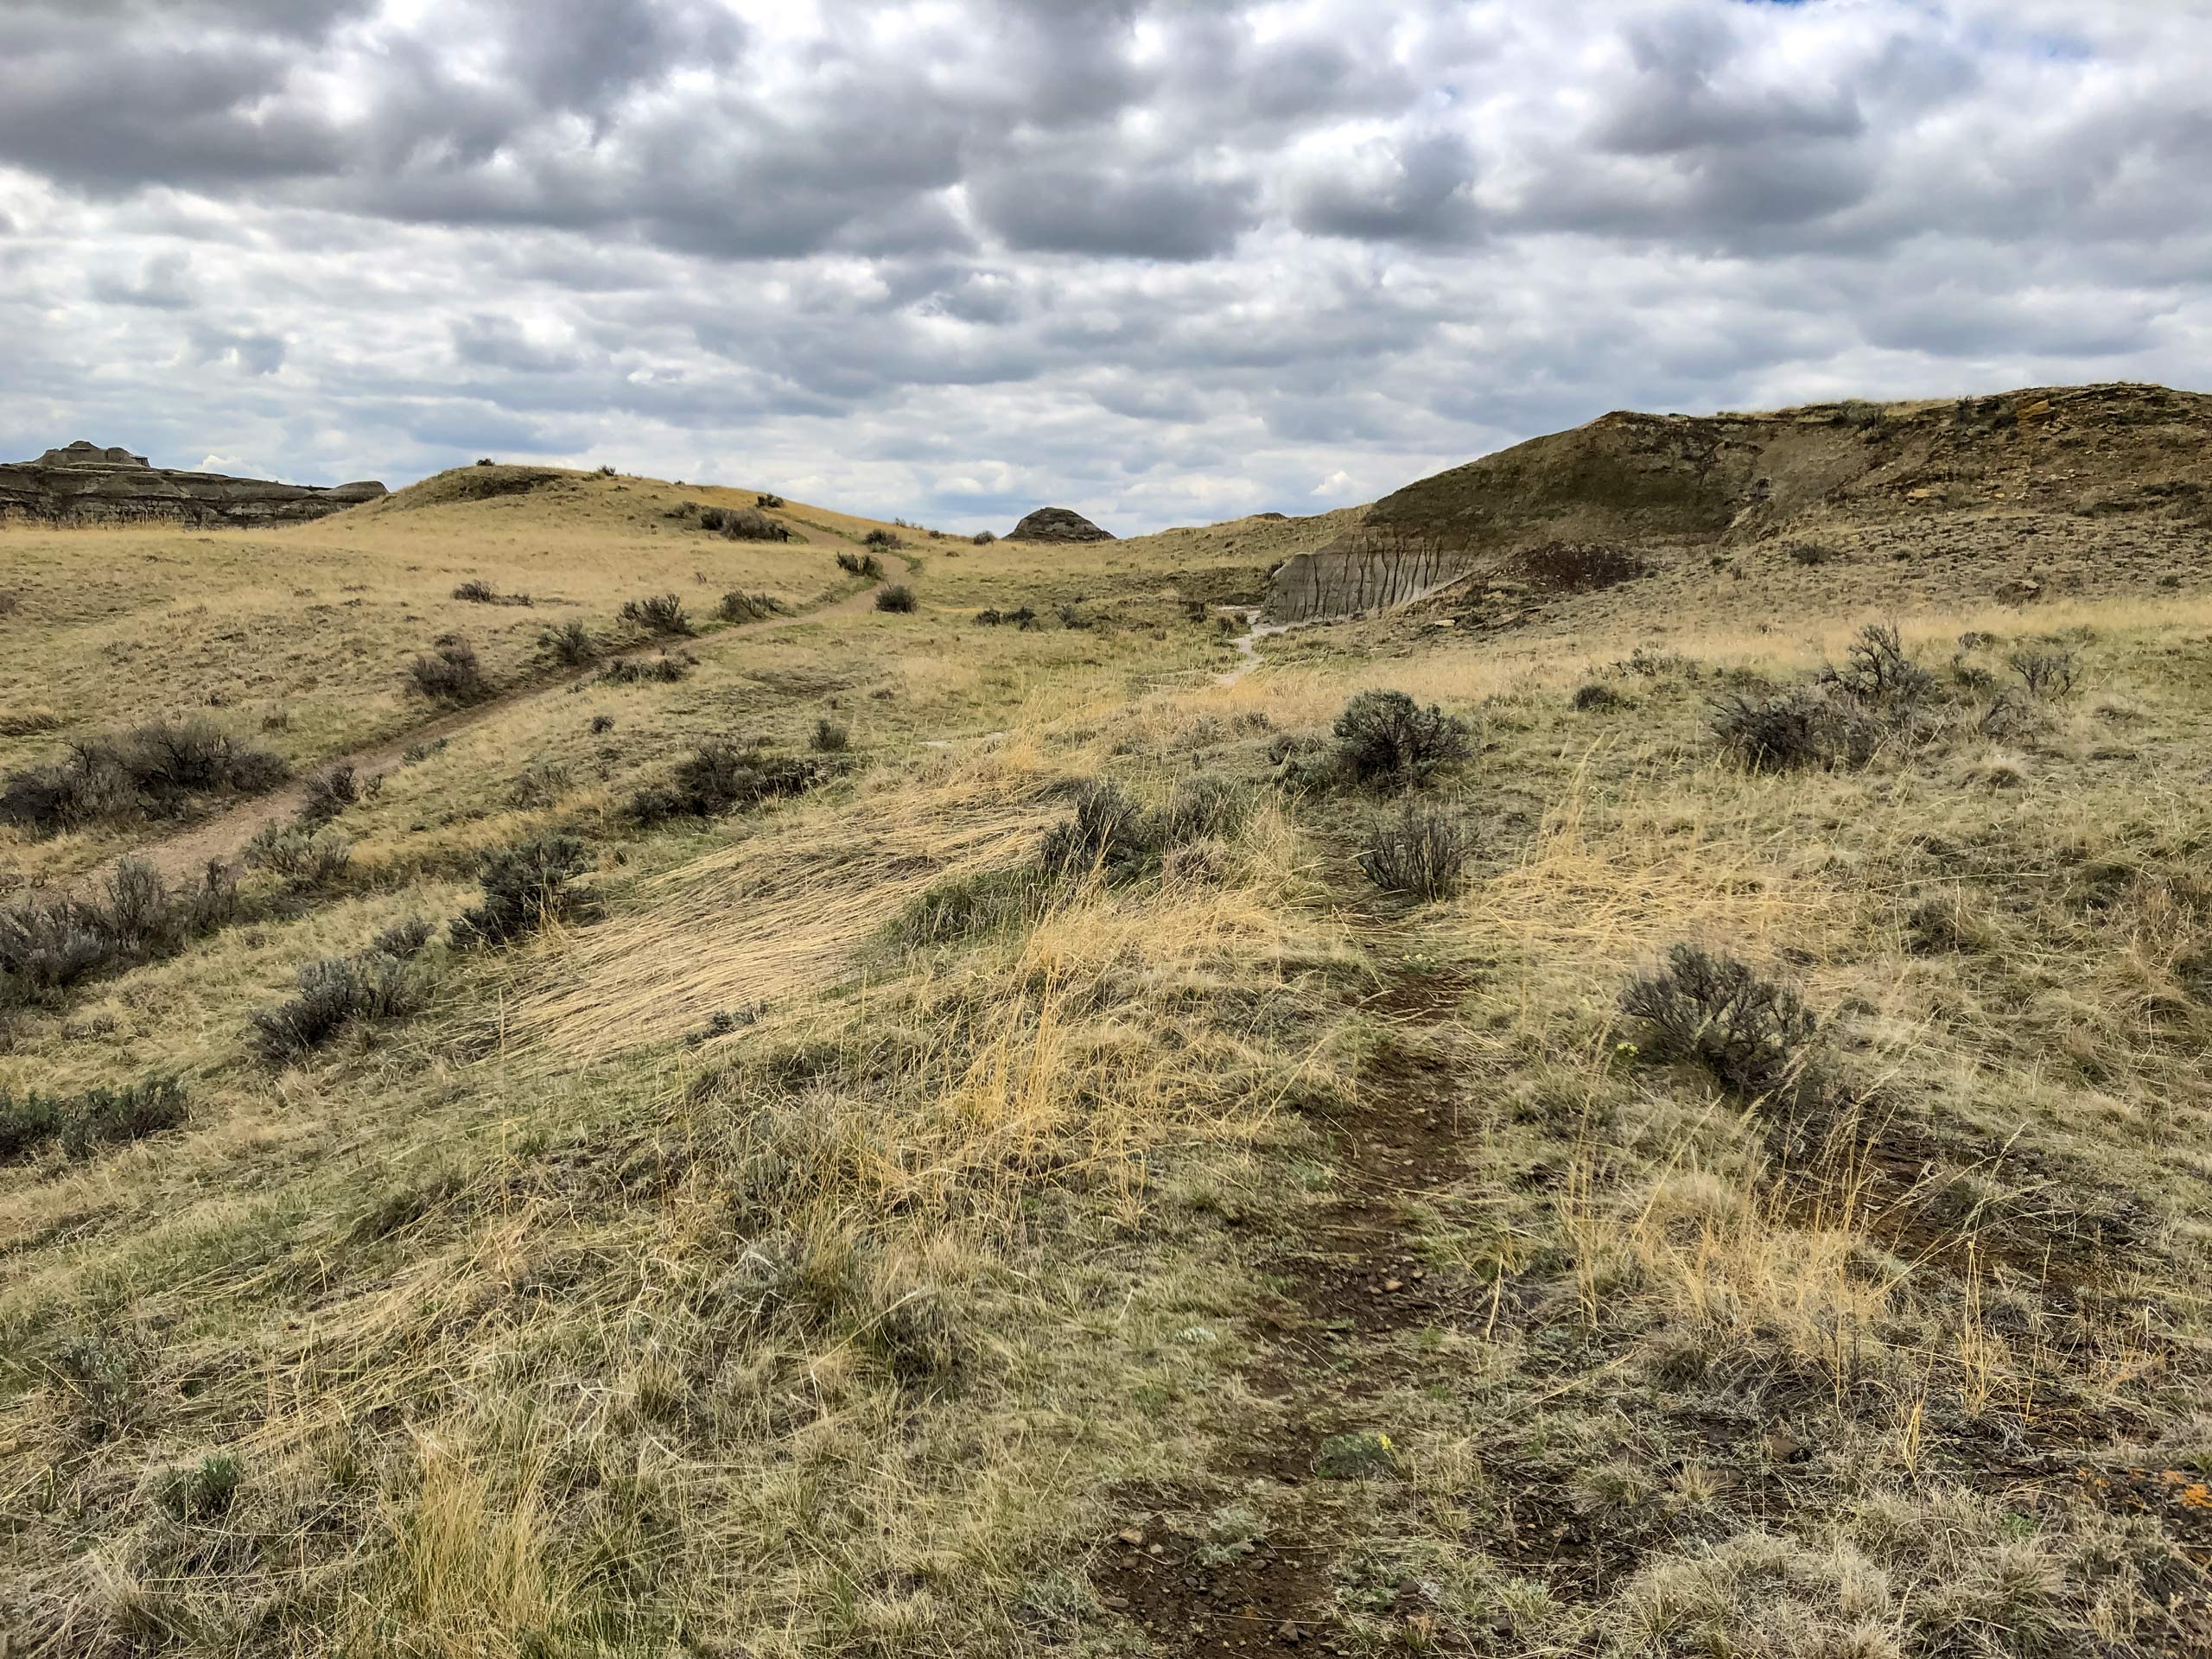 Hiking Trail of the Fossil Hunters in the grasslands of Dinosaur Provincial Park Alberta